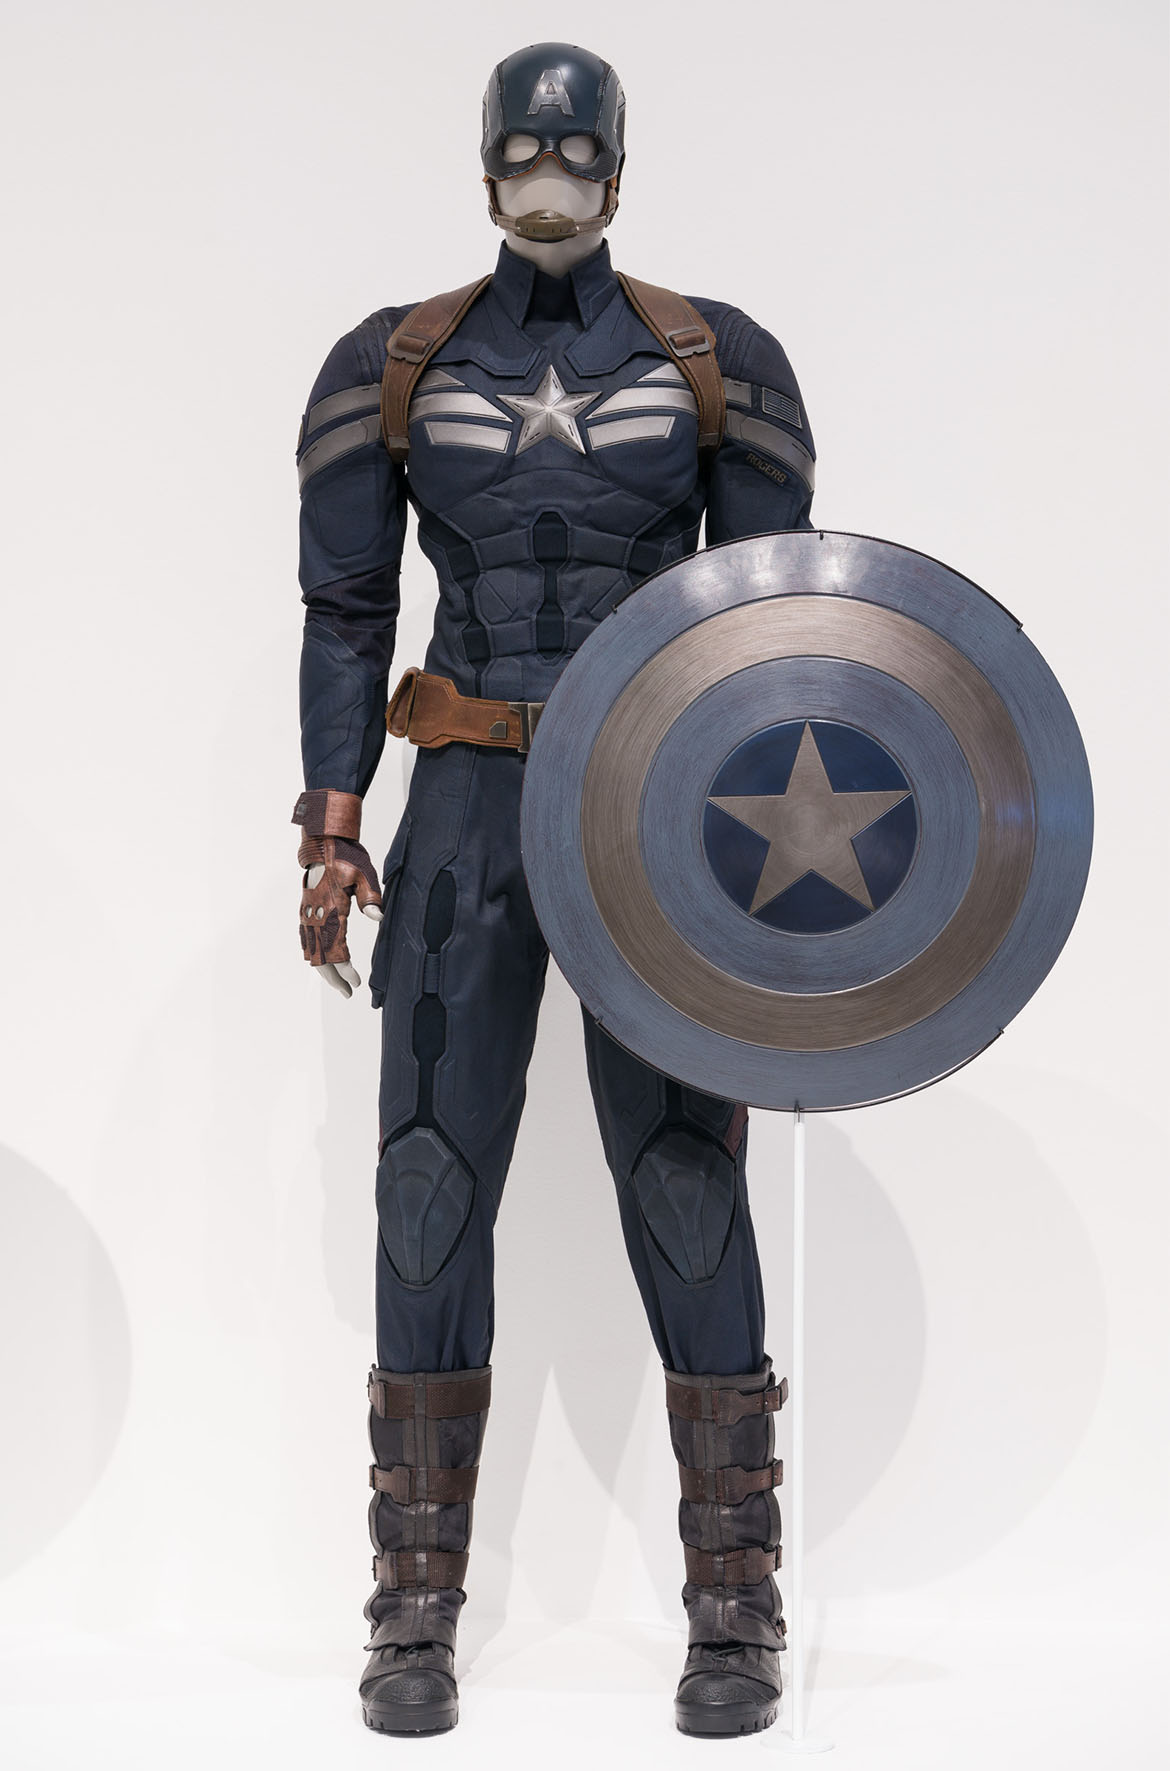 Installation view of Captain America's suit and shield, 'Captain America: Living legend’ room, ‘Marvel: Creating the Cinematic Universe’, GOMA 2017